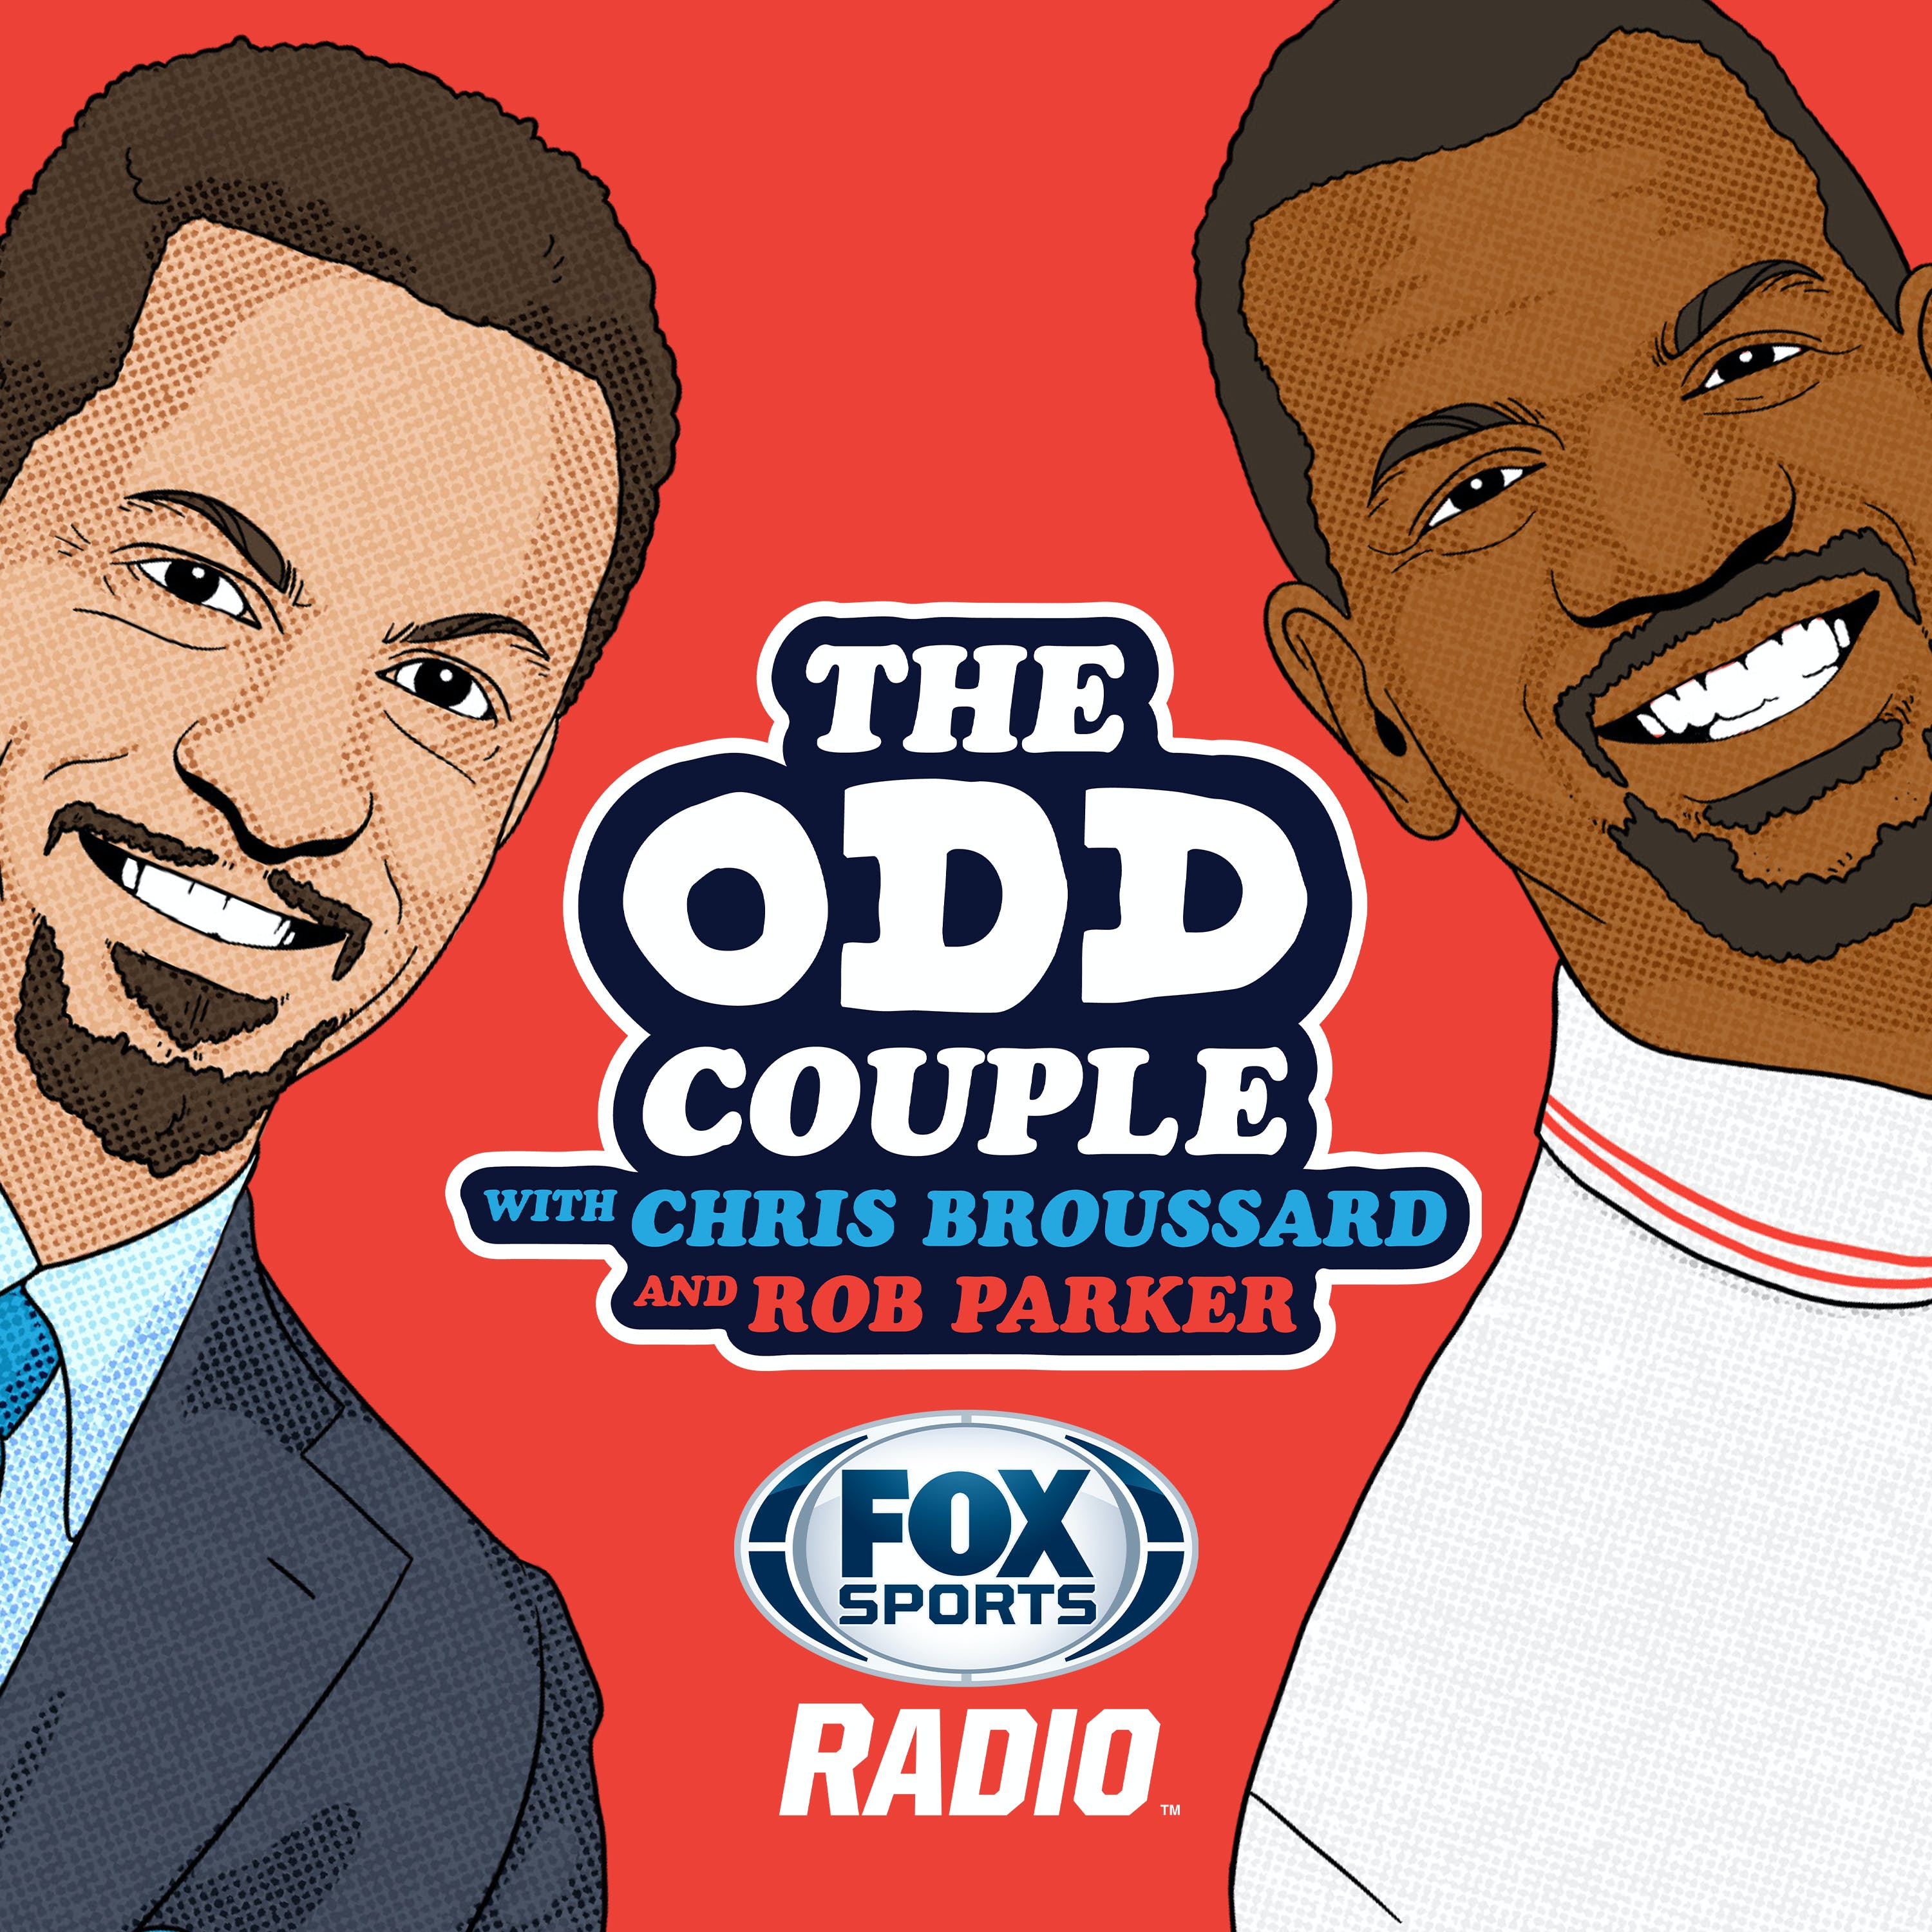 01/19/2021 - Best Of the Odd Couple